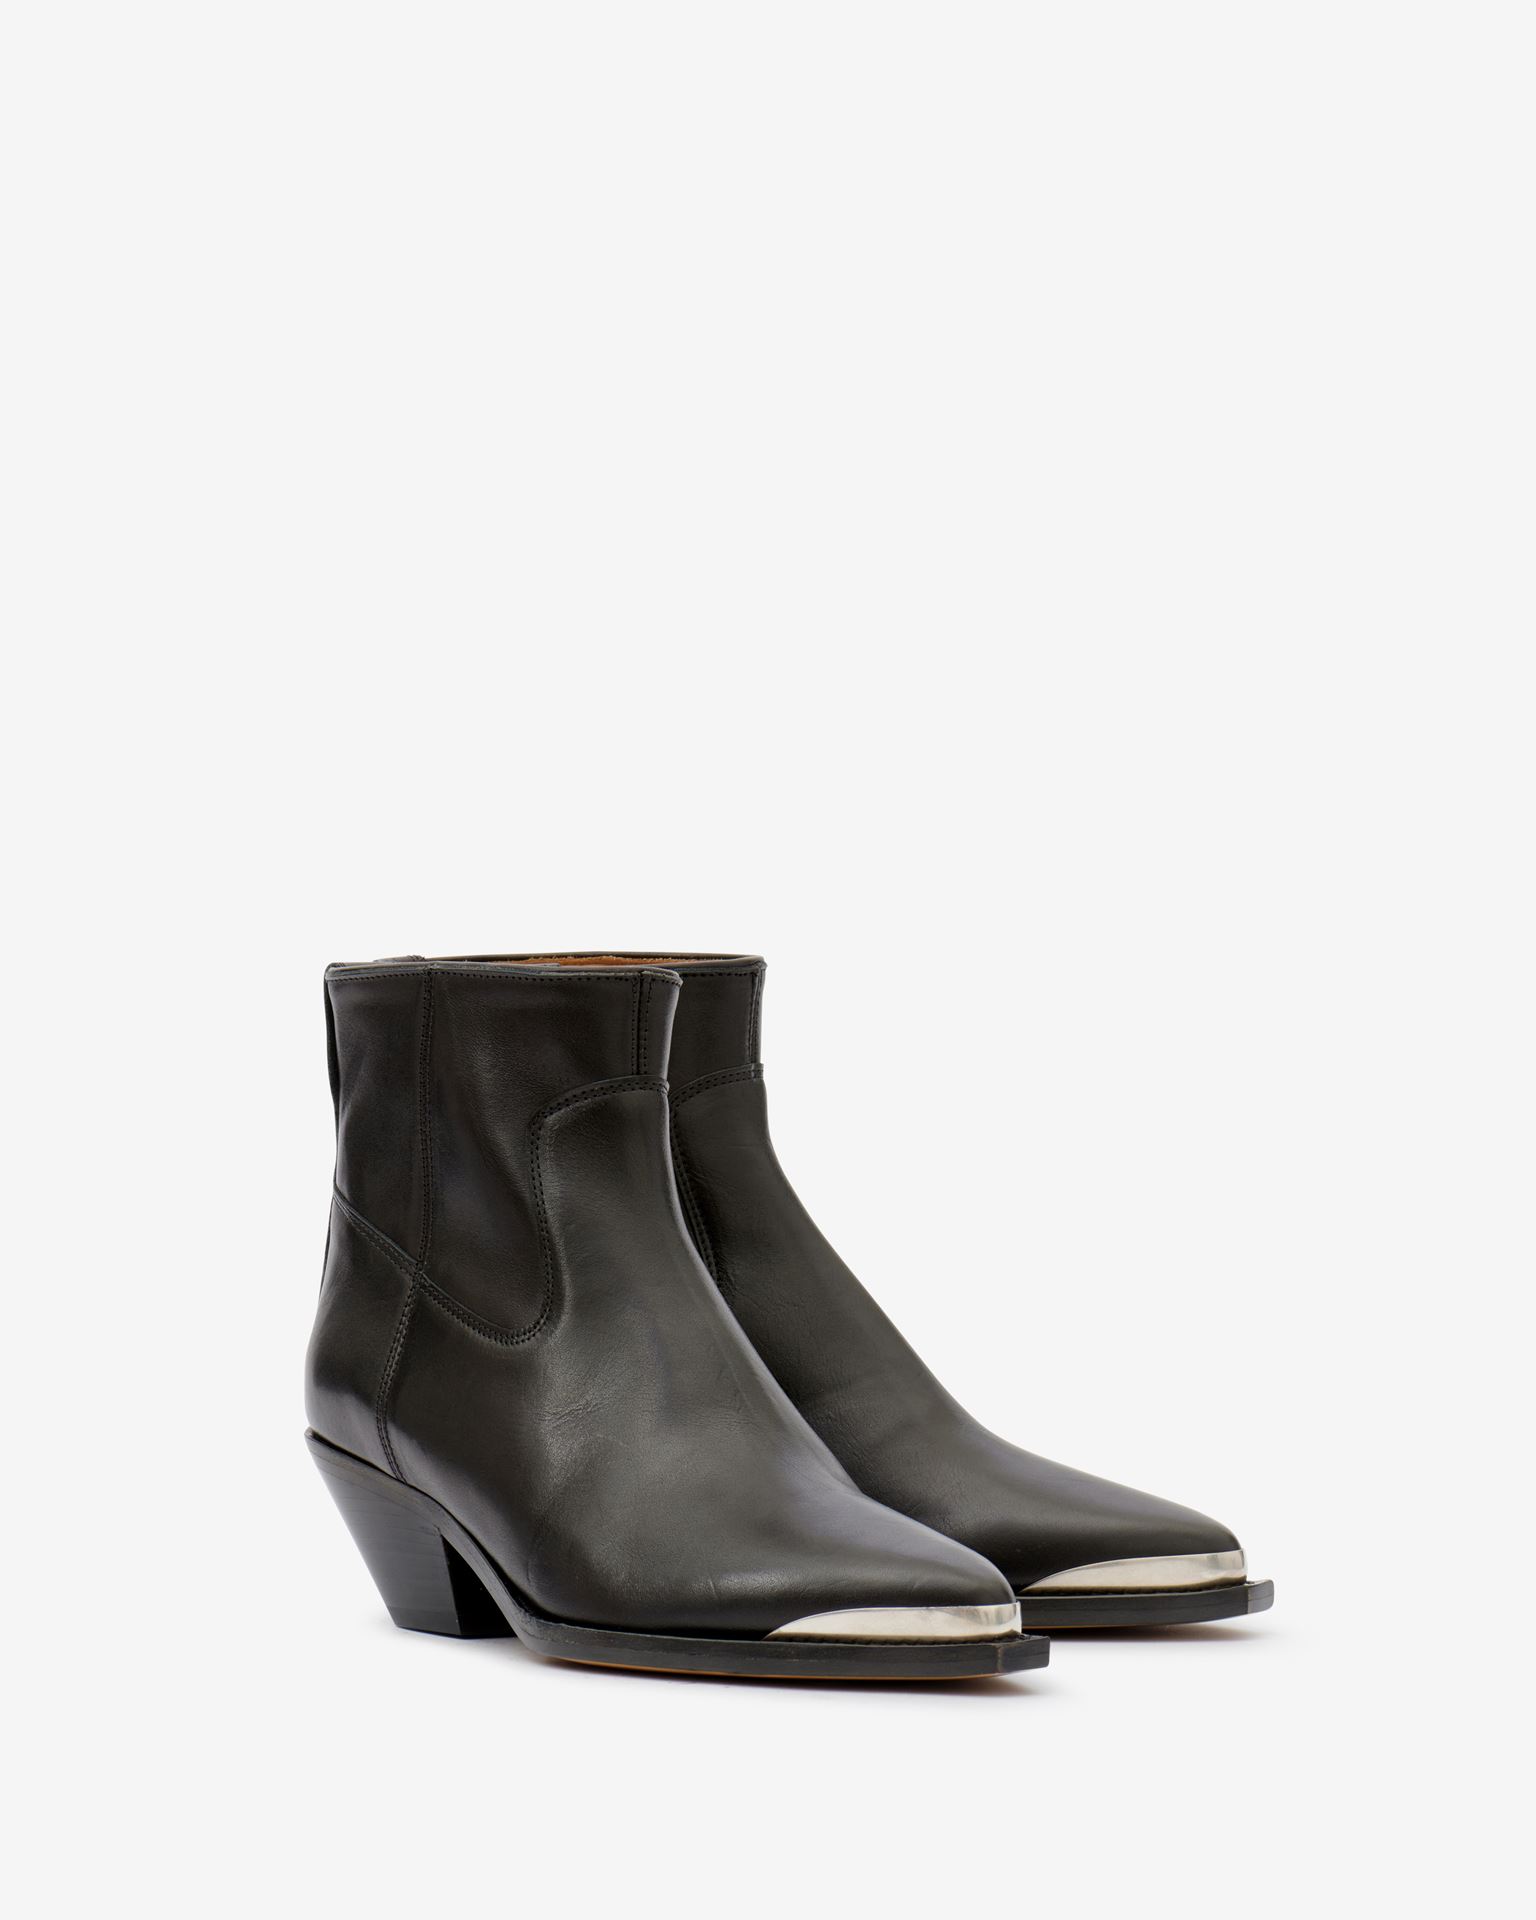 Isabel Marant, Adnae Leather Low Boots - Women - Black